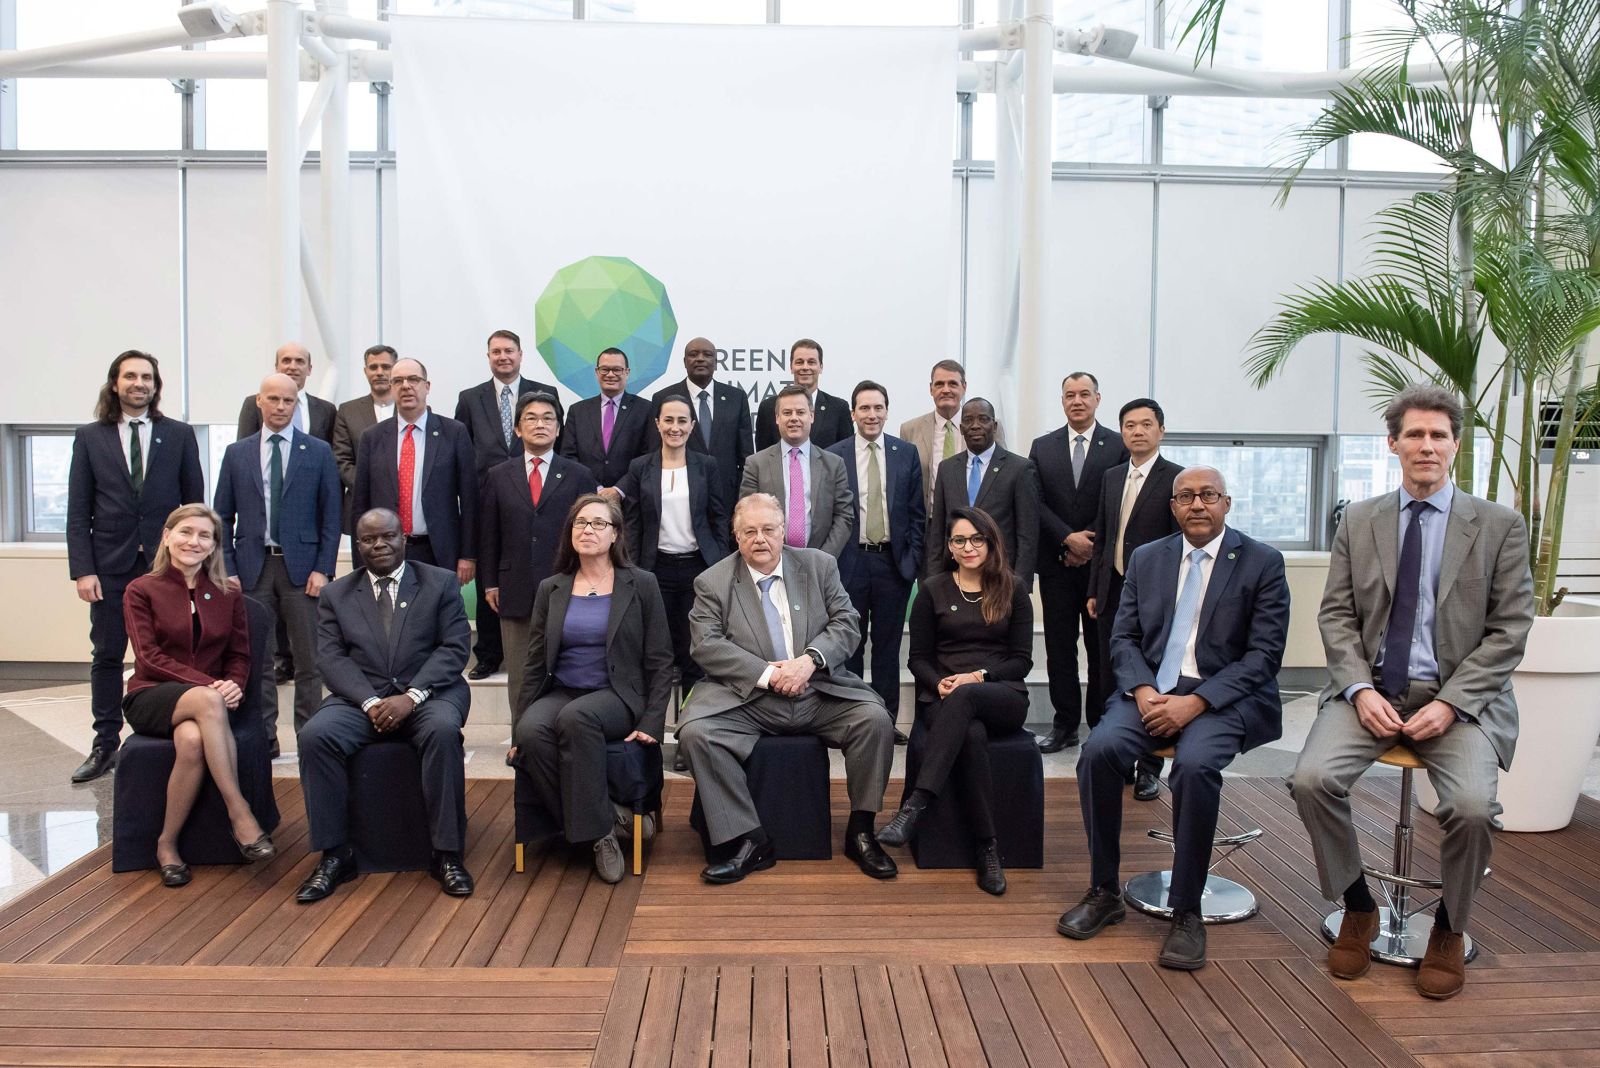 The 24 board members of the Green Climate Fund.